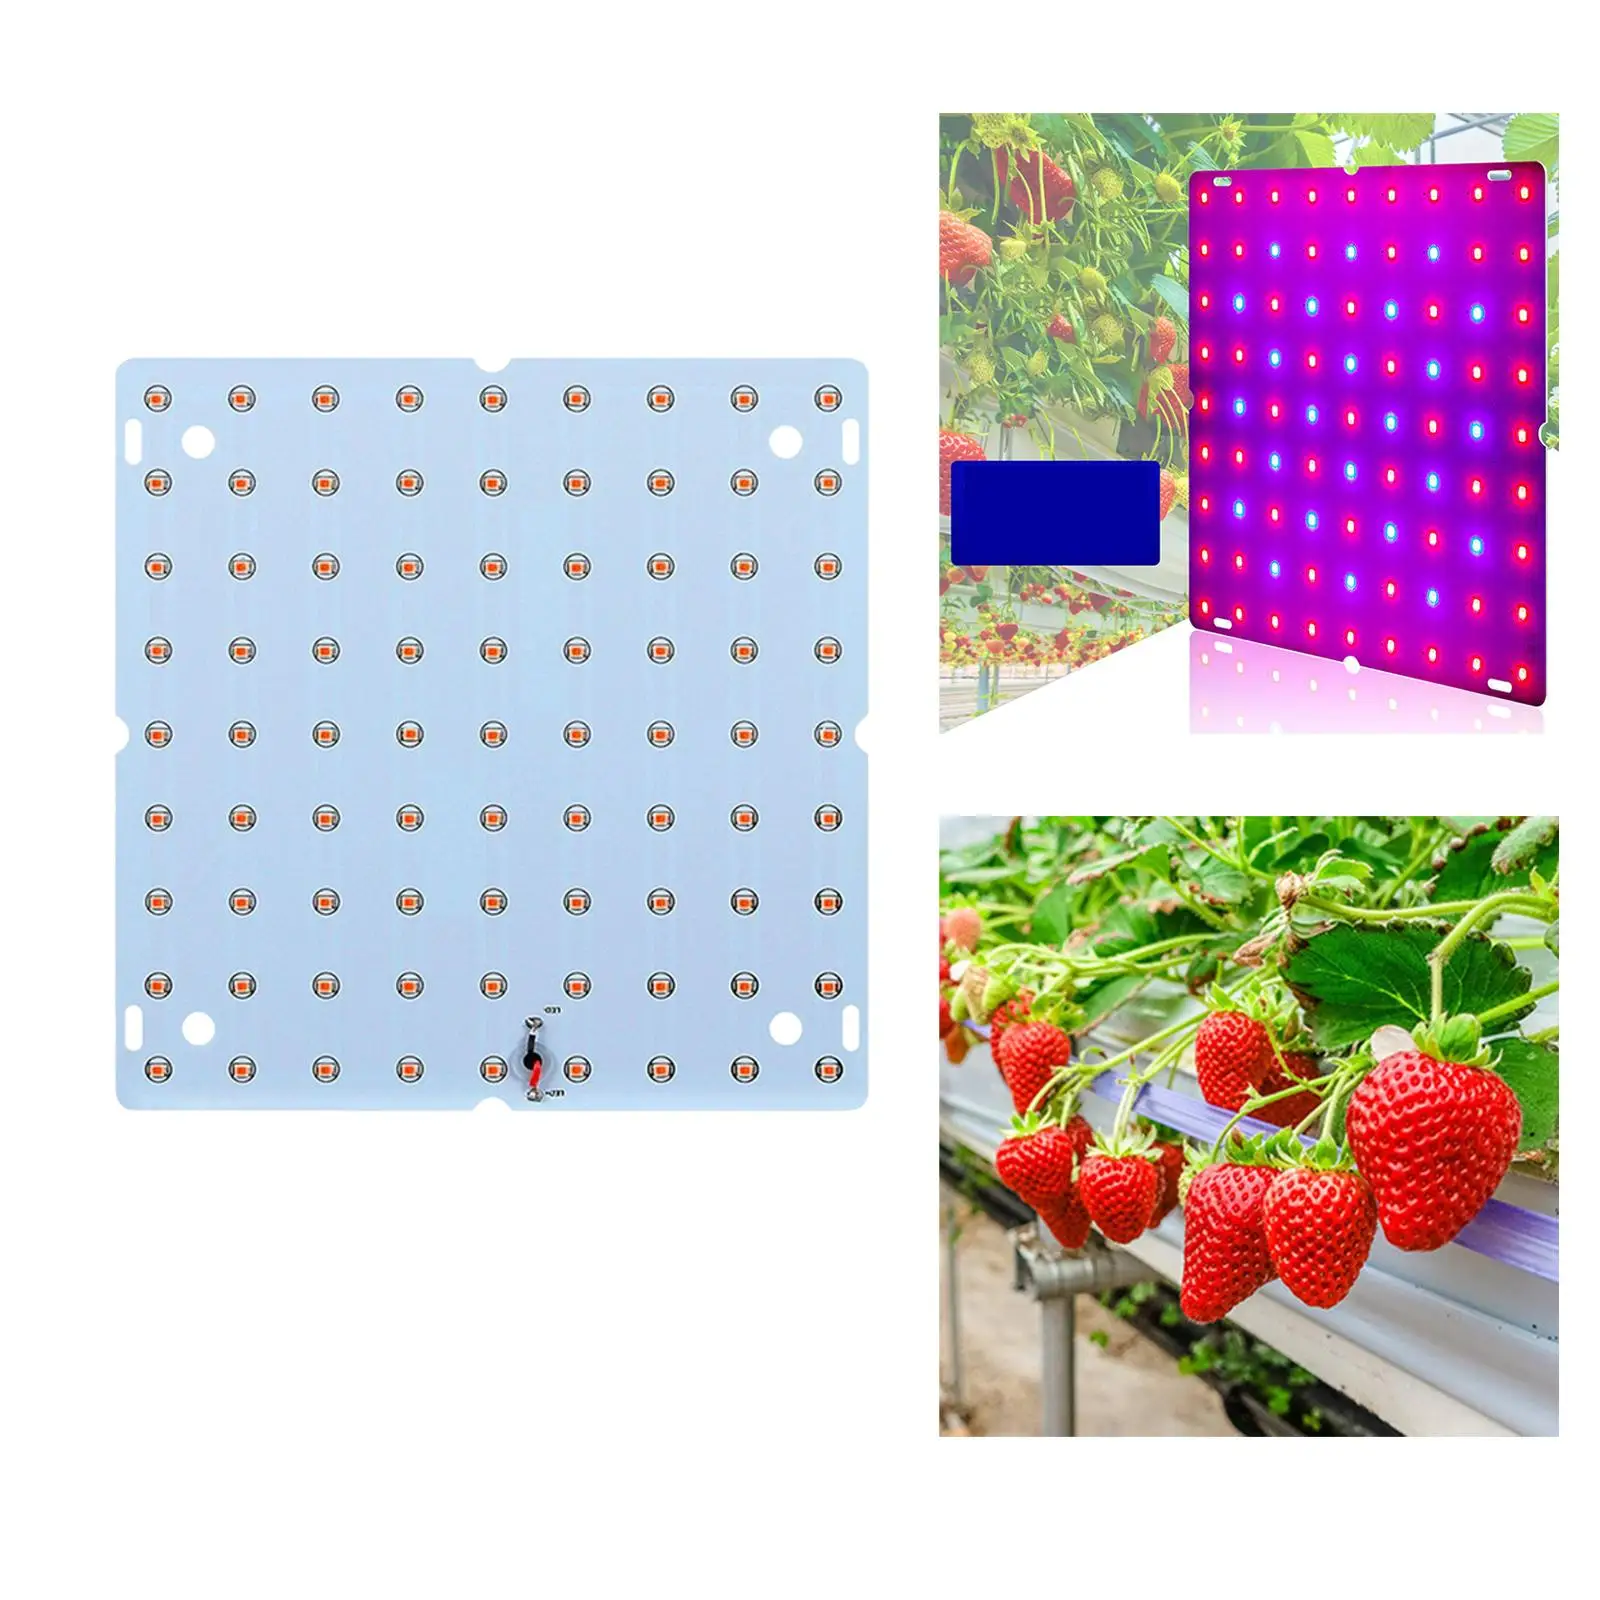 Aluminum Alloy Plant Grow Light 1091LM Full Grow Light for Flower Bloom Hydroponics Vegetable Seed Starting Greenhouse